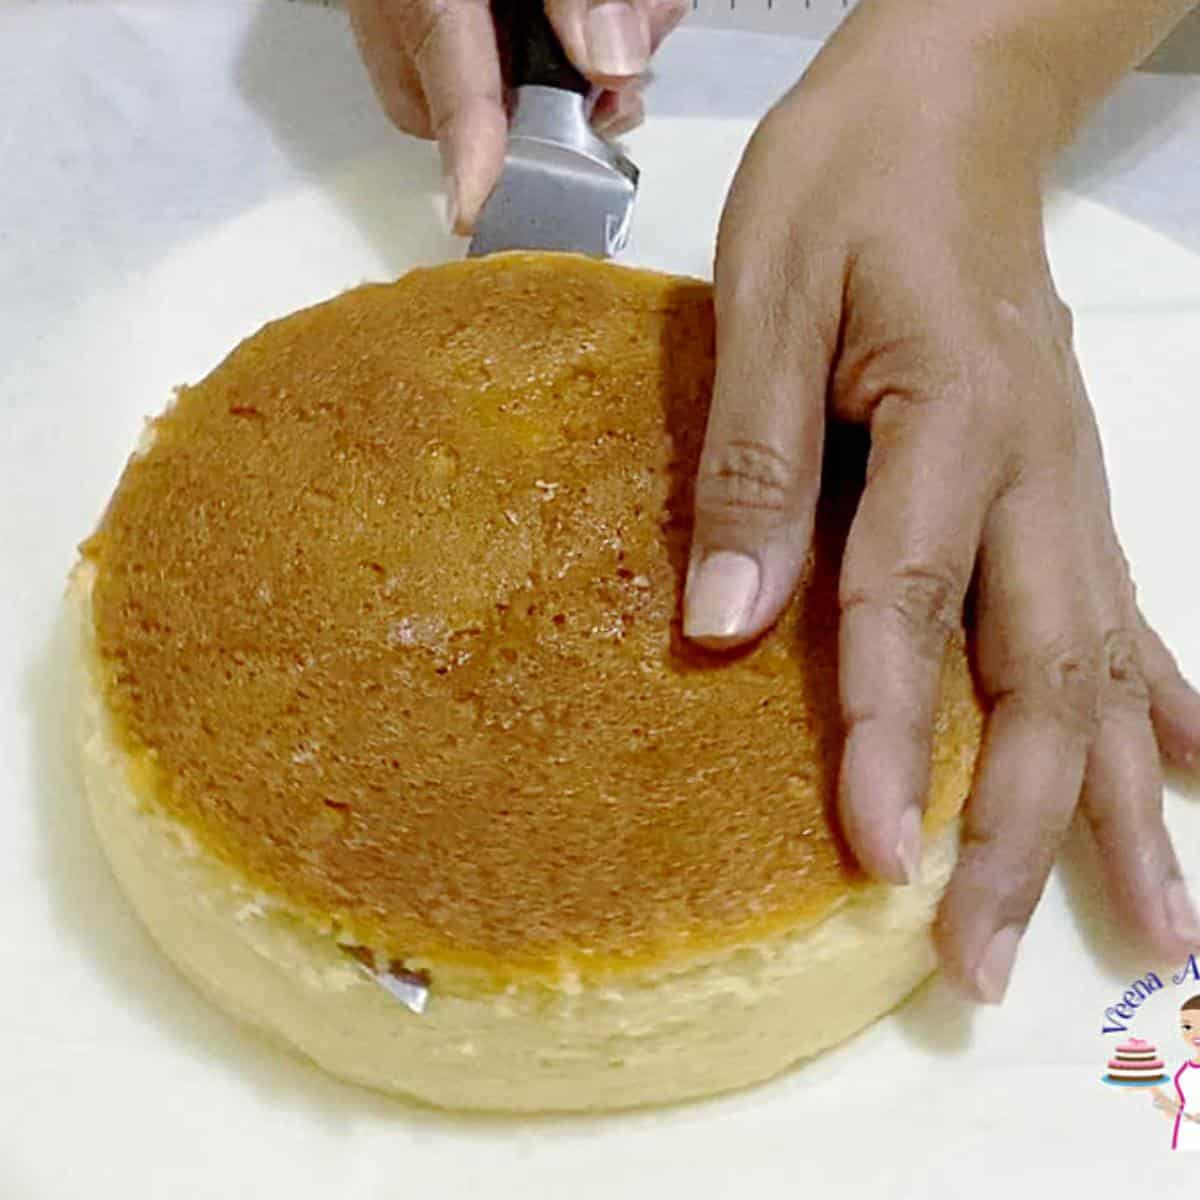 Leveling the top of a cake layer.